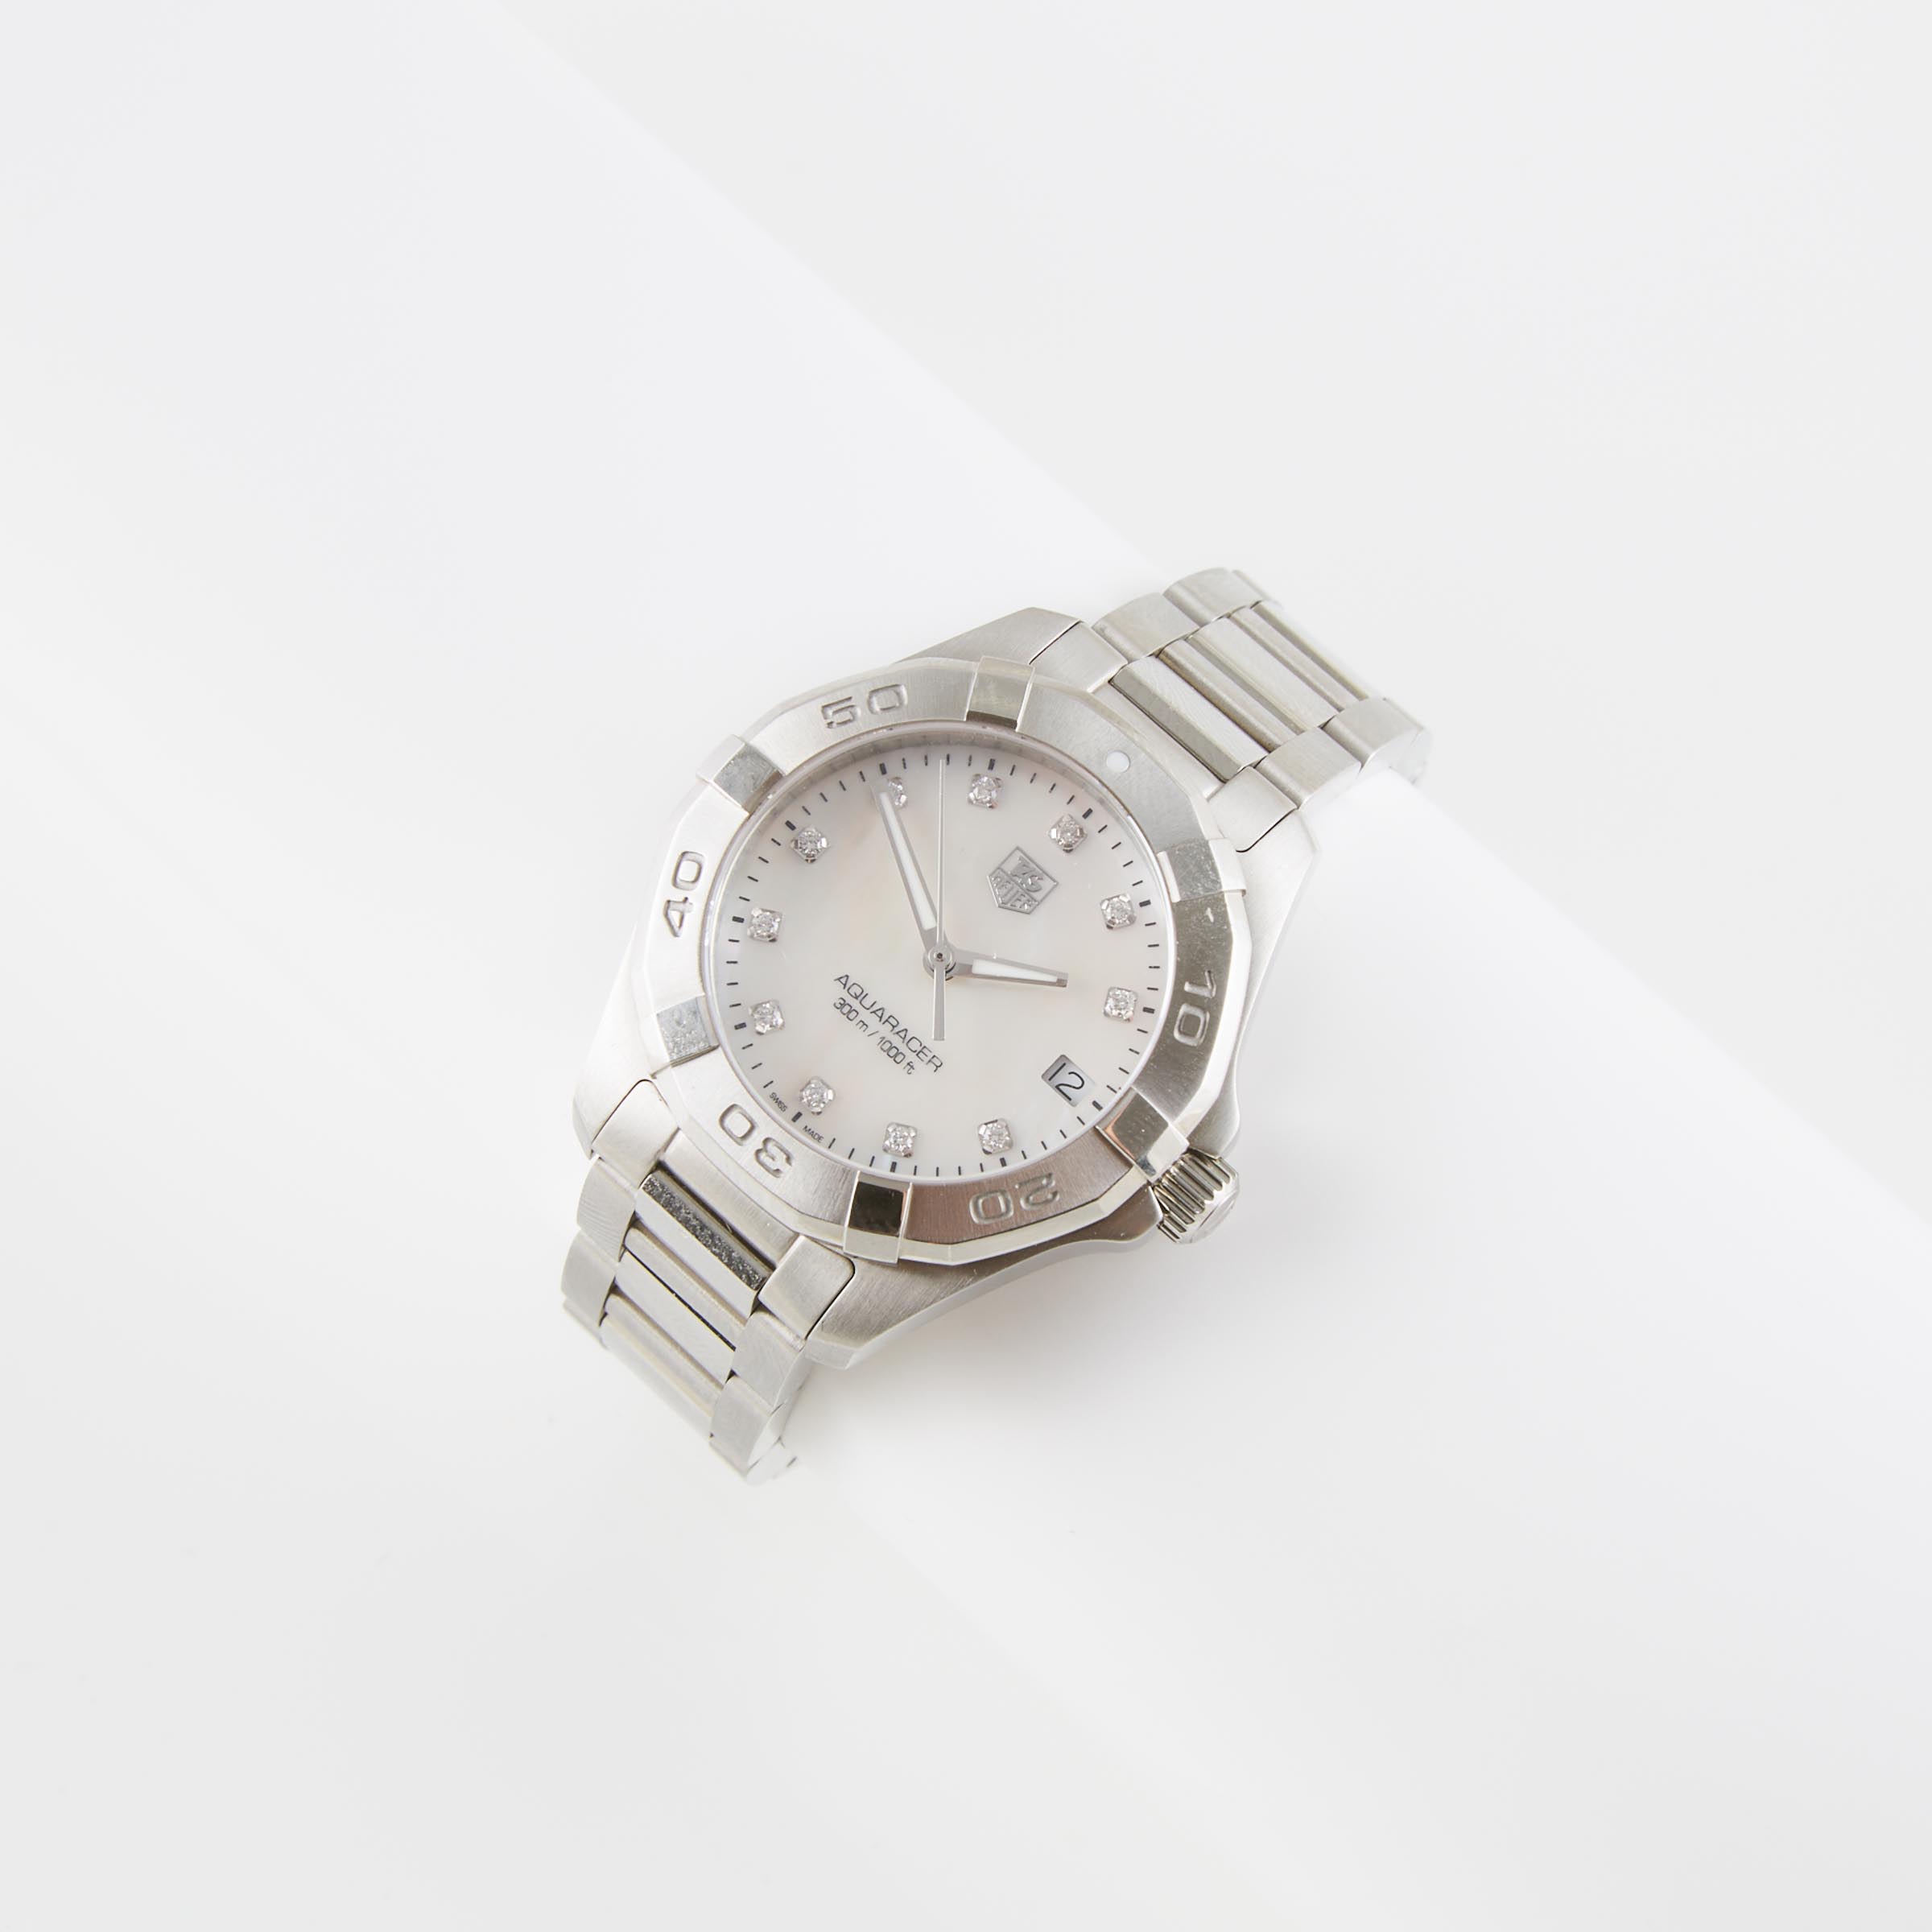 Lady's Tag/Heuer Aquaracer Wristwatch With Date